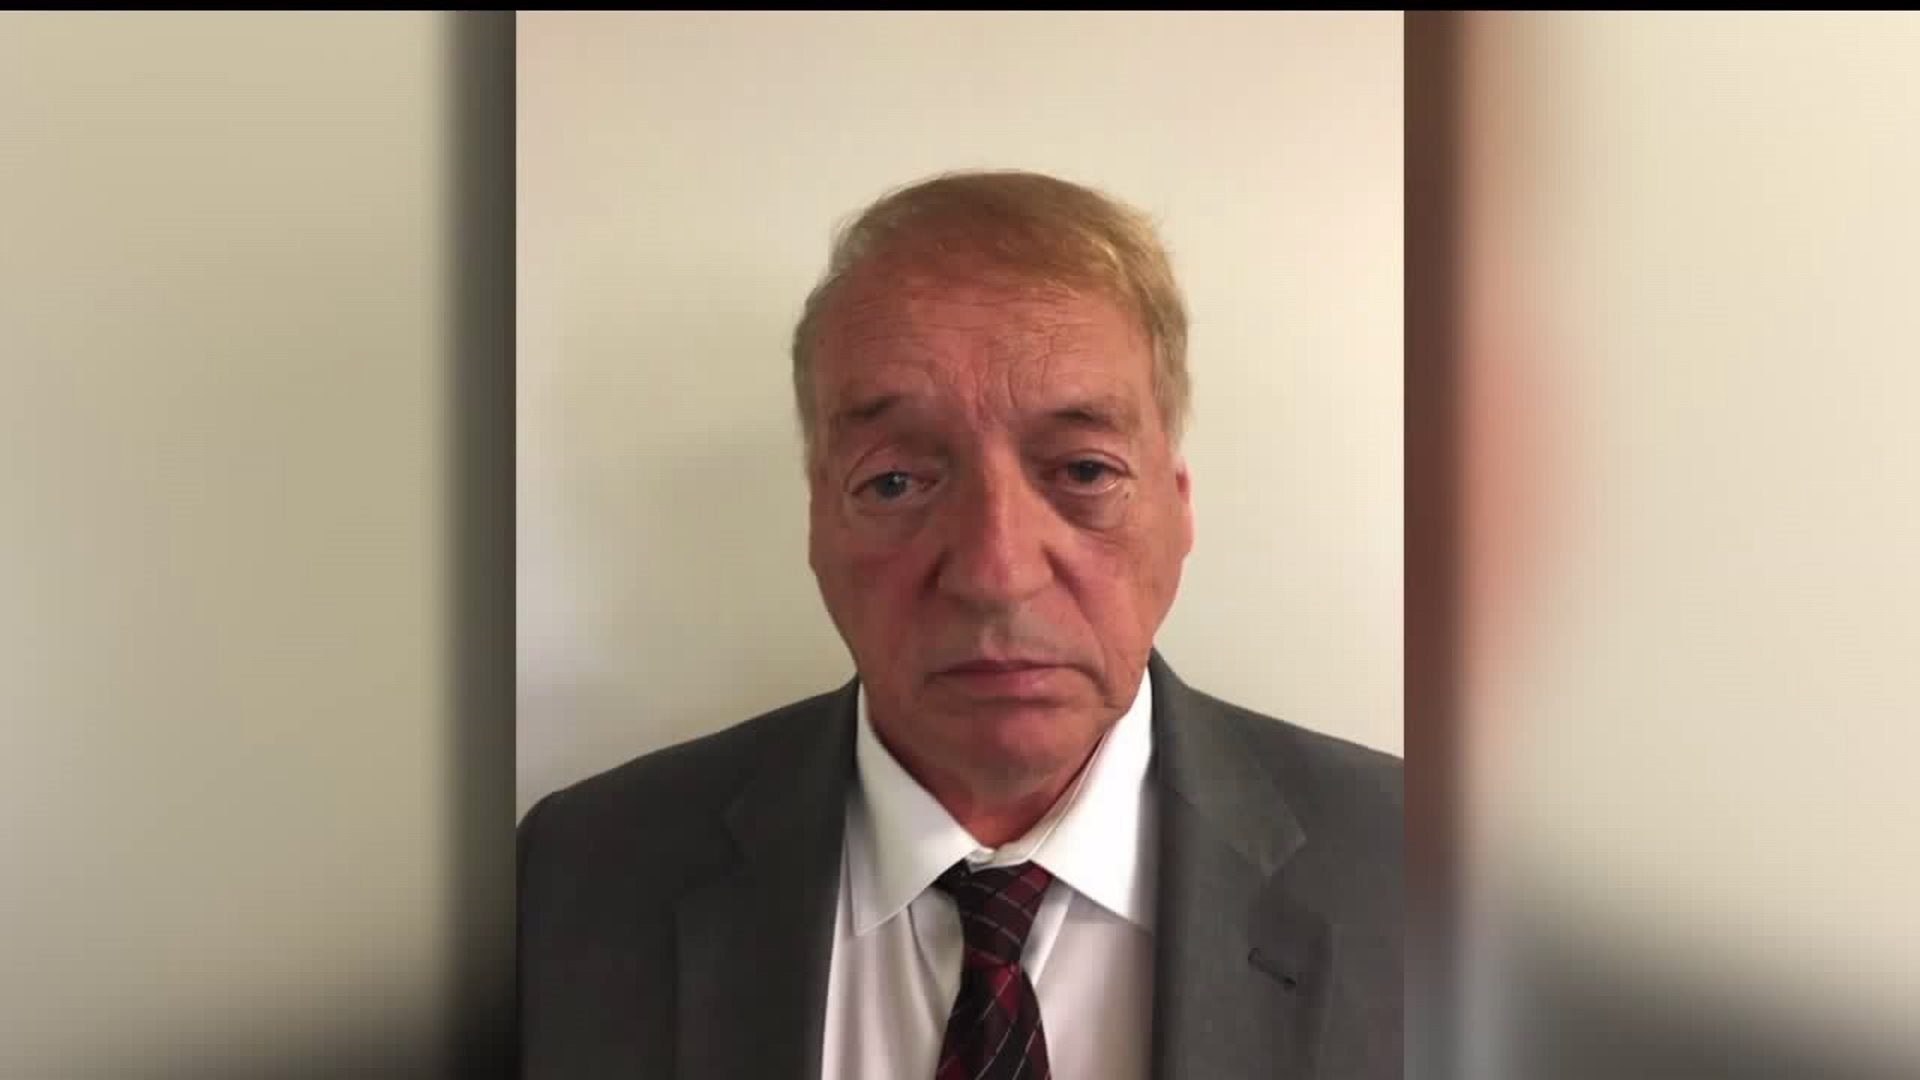 Retired Air Force general charged with possession of child porn after raid of his Mechanicsburg home